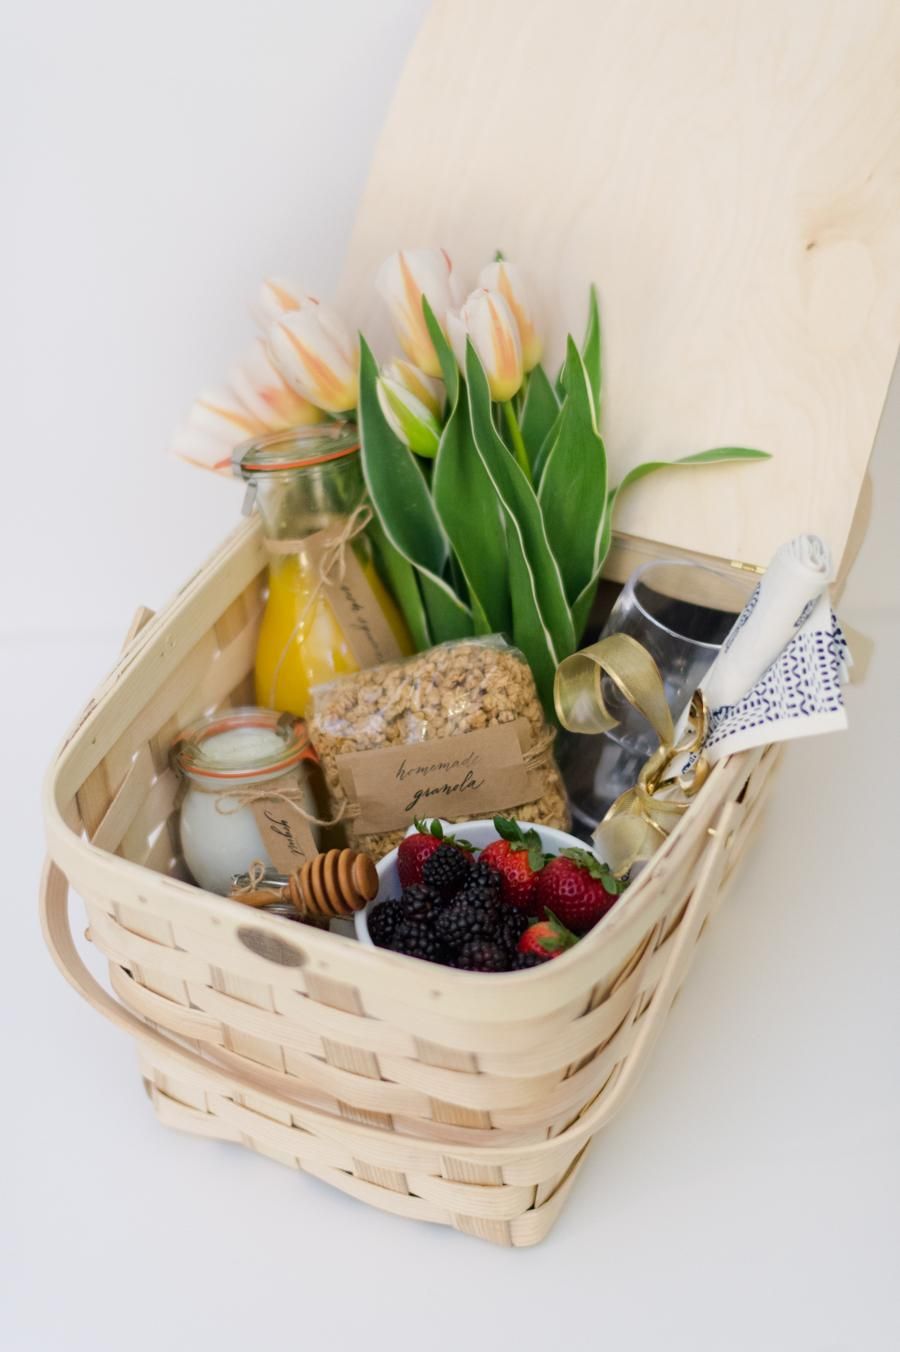 Bid on the Best: 27 Silent Auction Basket Ideas That Will Amaze You